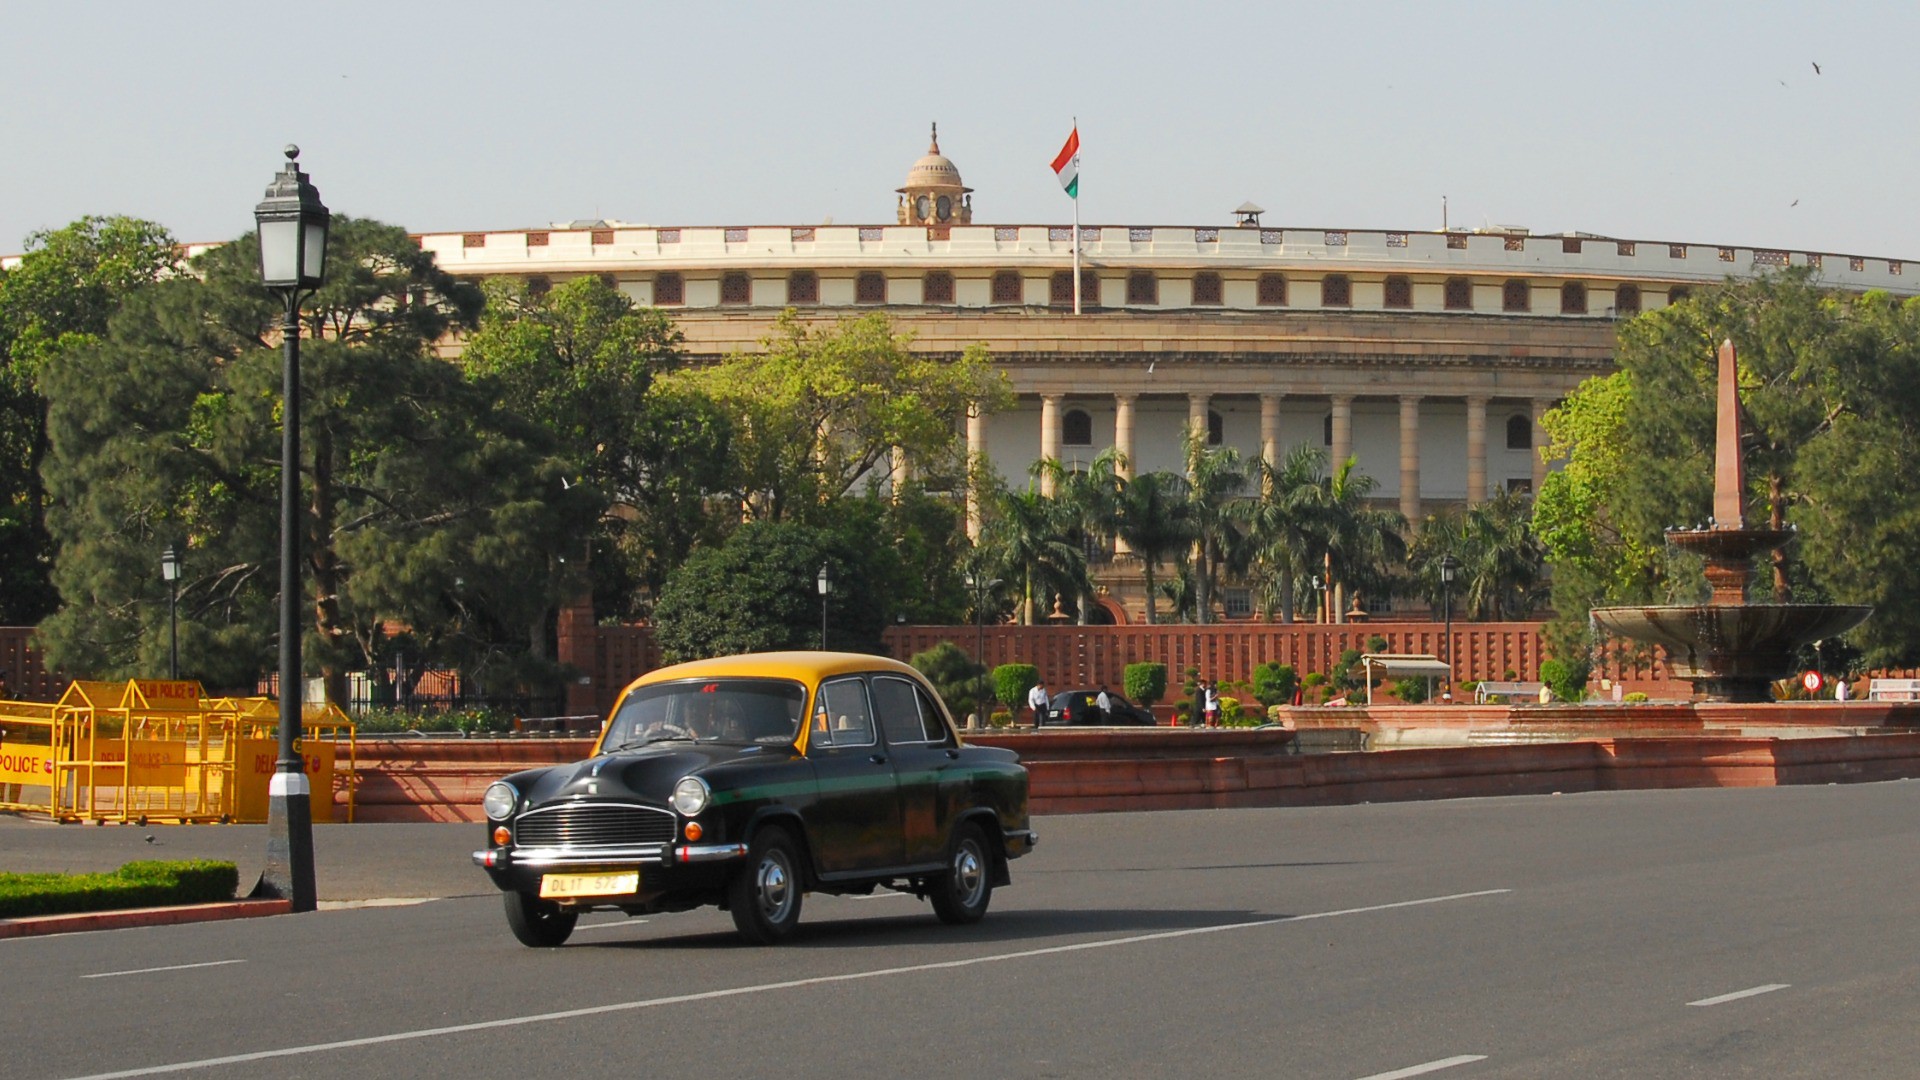 Le Parlement indien (Photo;Lord of the Wings/Flickr/CC BY-SA 2.0)